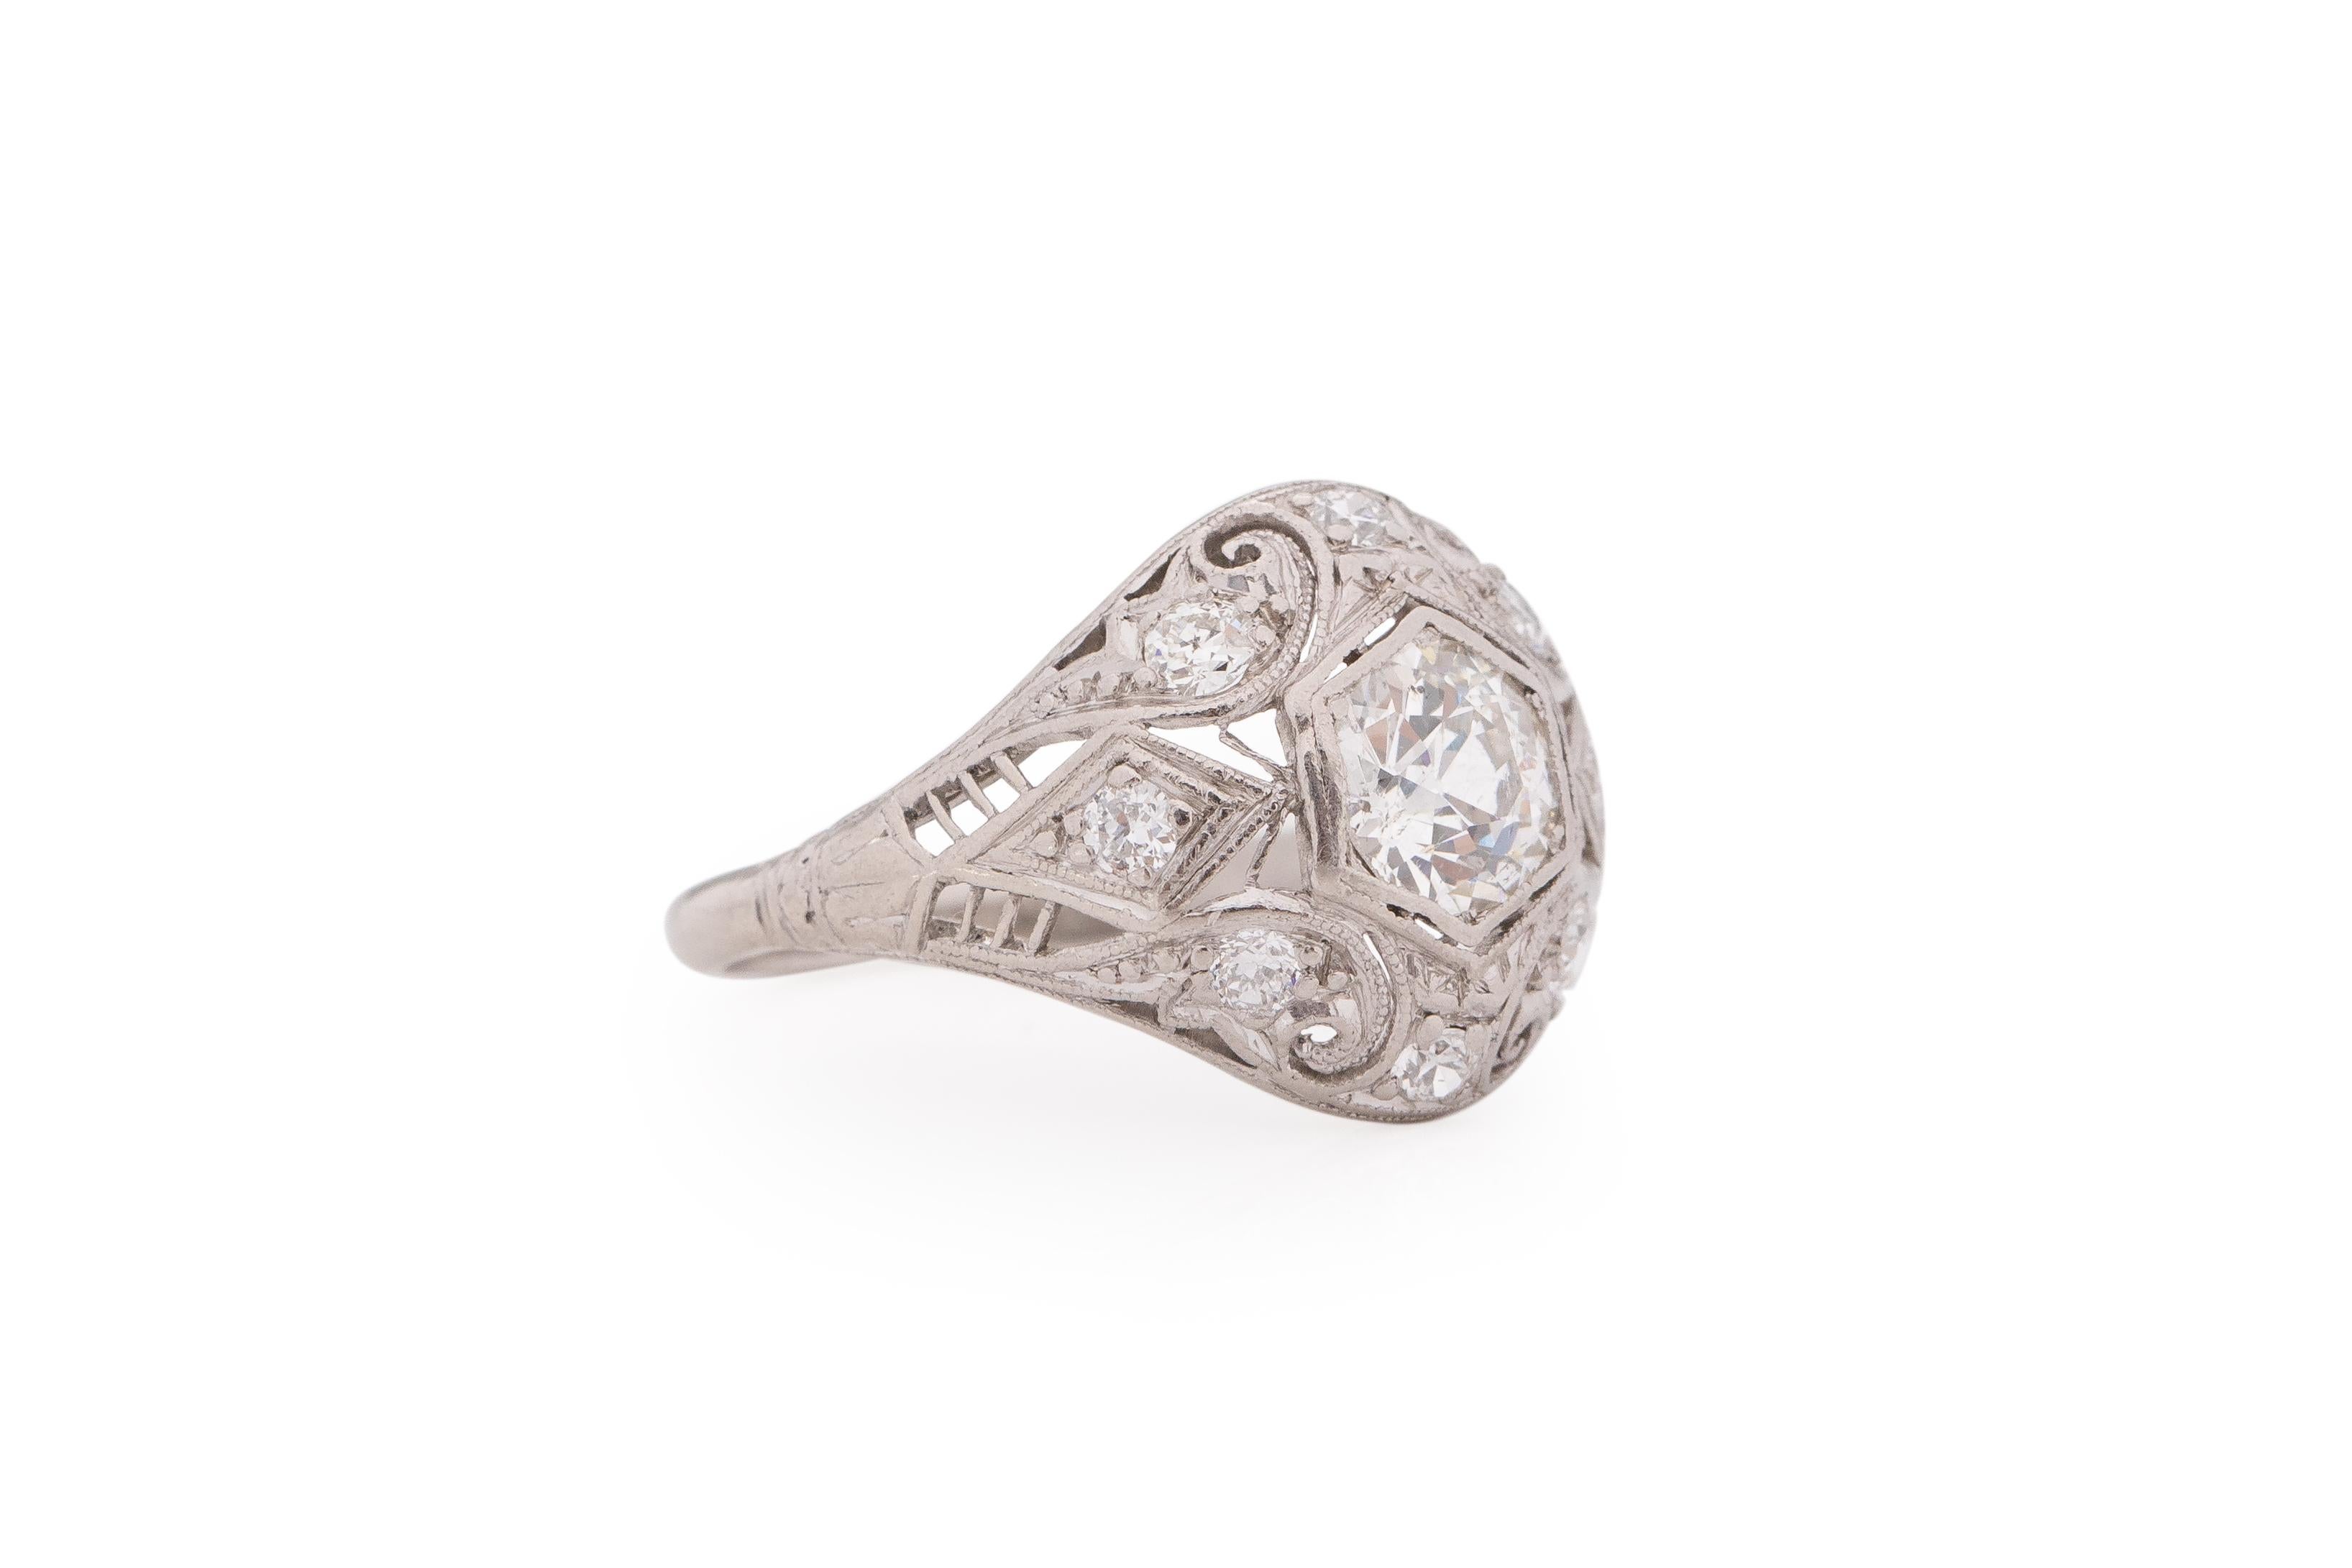 Ring Size: 6
Metal Type: Platinum [Hallmarked, and Tested]
Weight: 4.4 grams

Center Diamond Details:
Weight: .85 carat
Cut: Old European brilliant
Color: F
Clarity: SI2

Side Stone Details:
Weight: .15 carat, total weight
Cut: Antique European